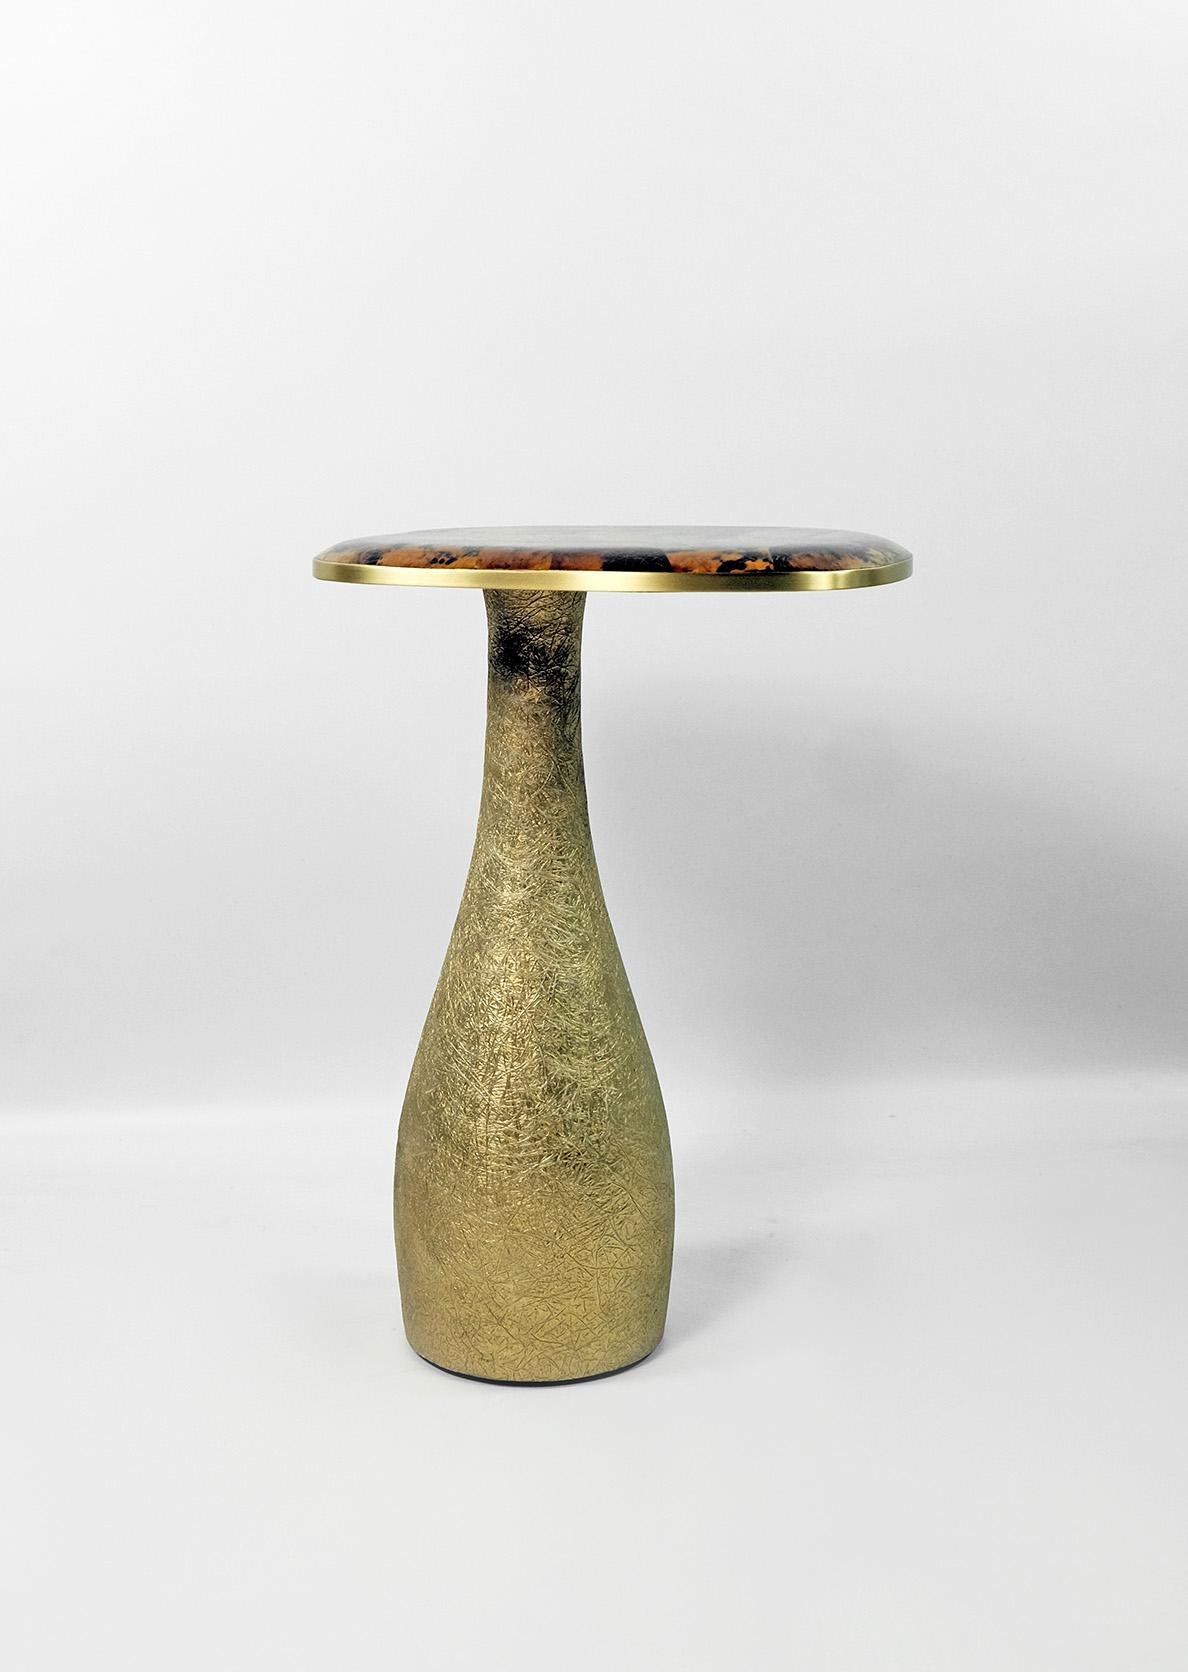 This side table is made of a polished amber yellow marquetry top with brass trims.
This marquetry has a look of turtle shell.
The base is made of wood with a gilded semi-raw glass fiber inlaying.
The semi raw finishing brings an interesting texture